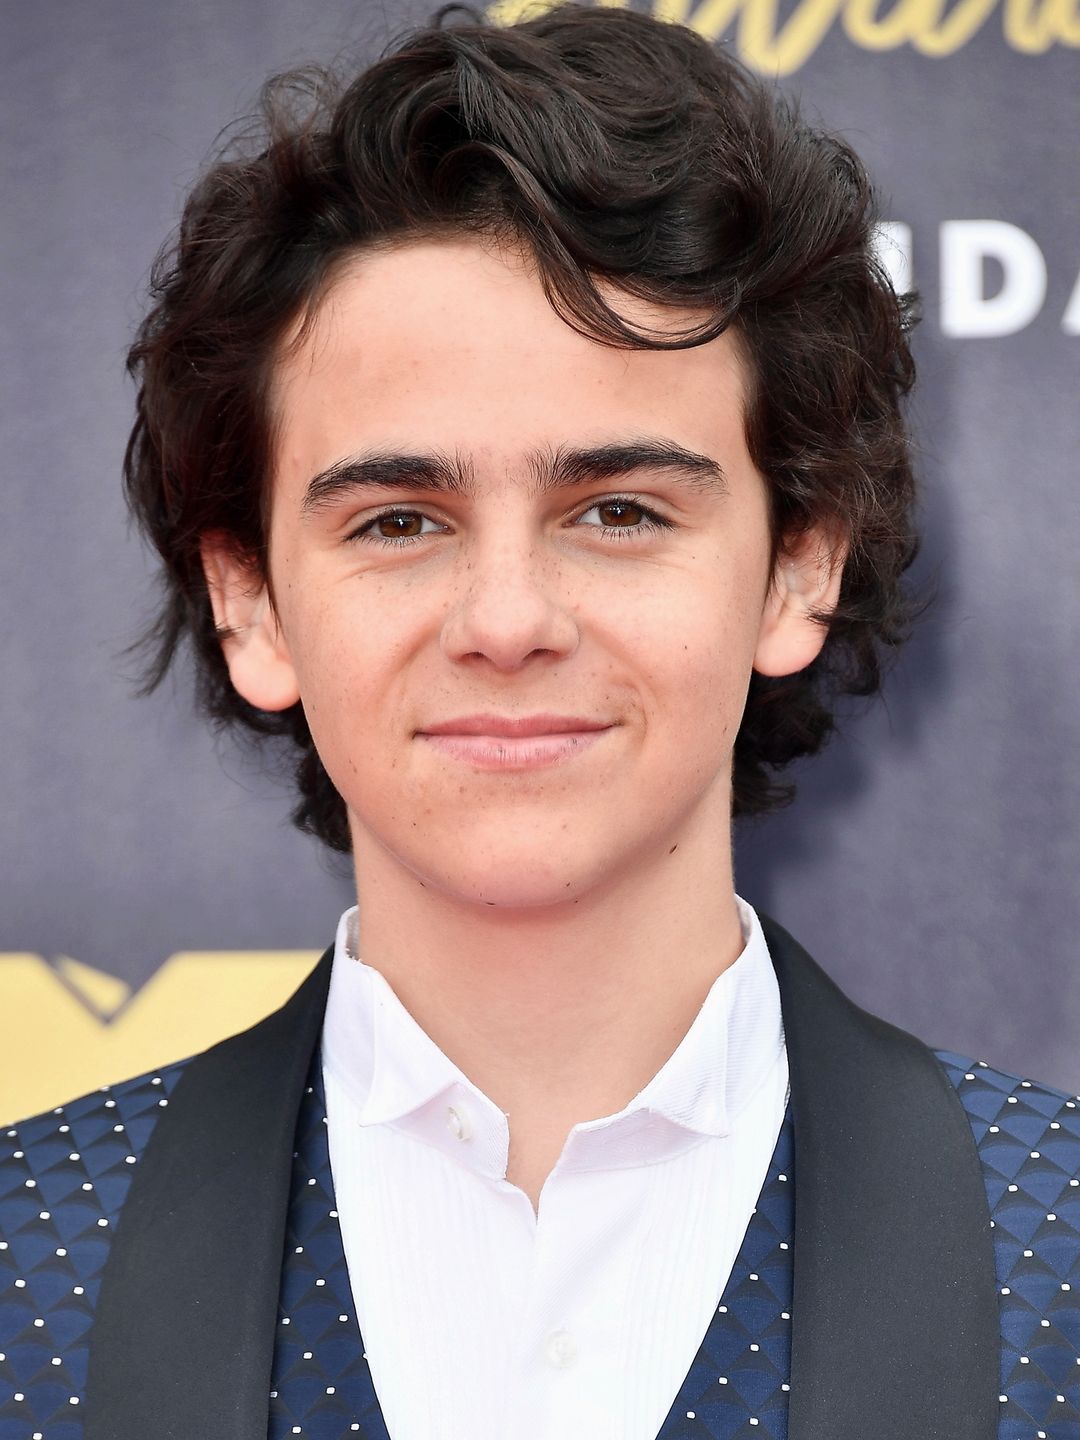 Jack Grazer who is his father